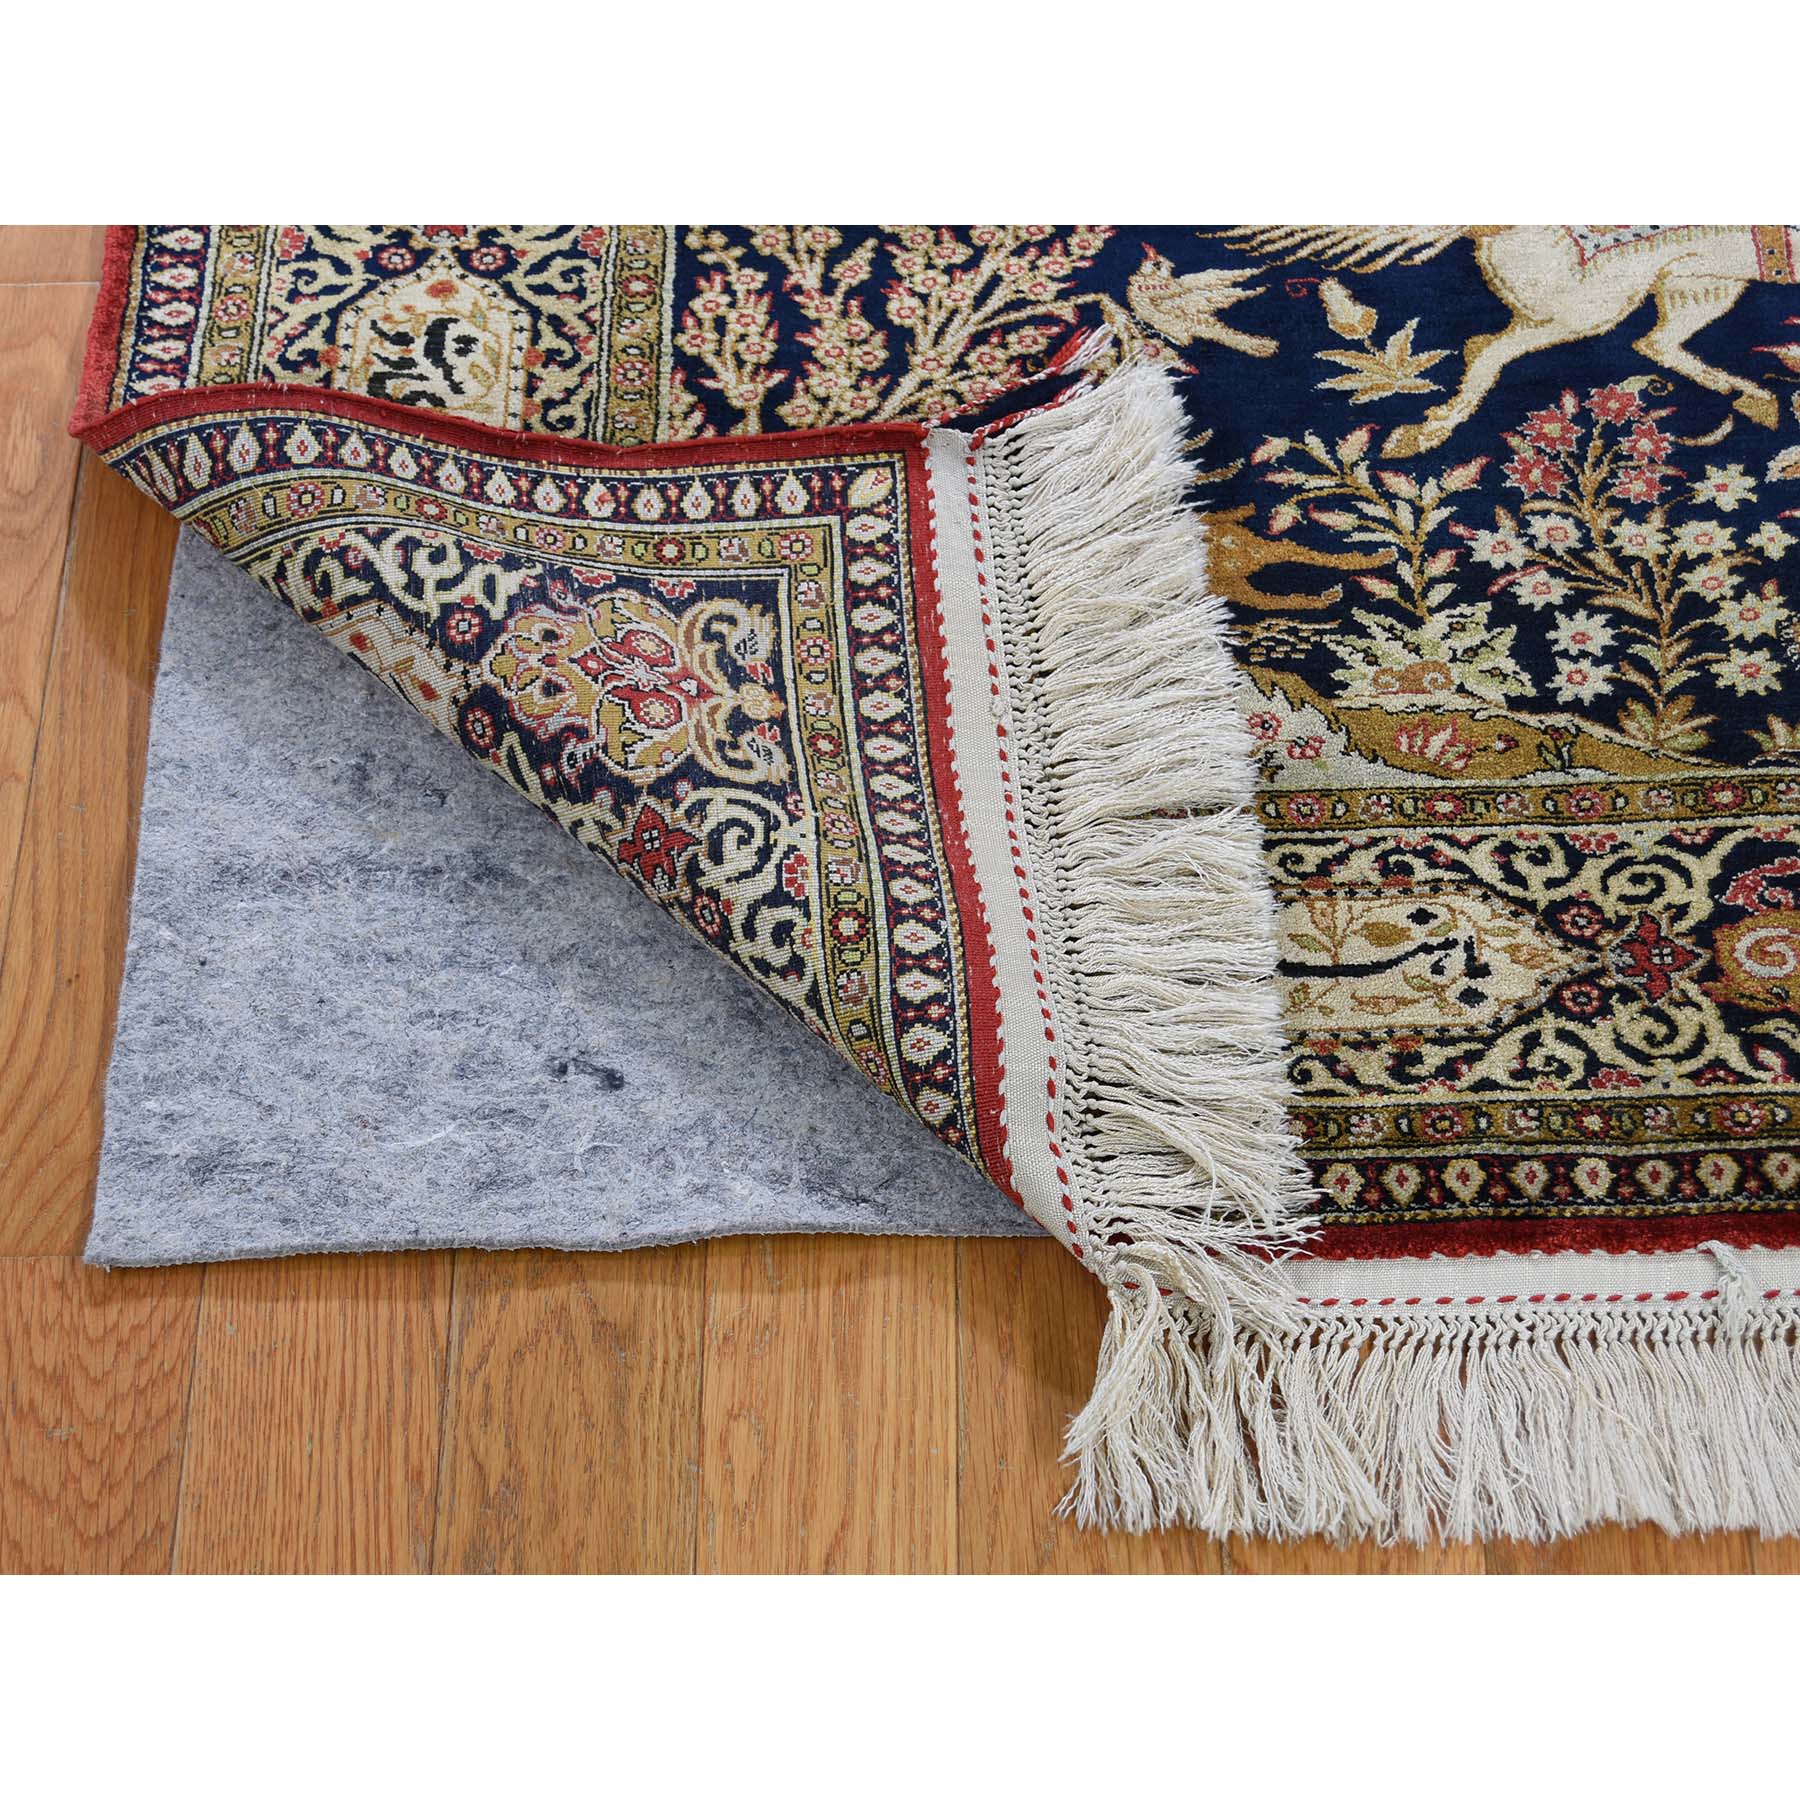 4'4"x6'8" Navy Blue Vintage Persian Silk Qum Hunting Design With Poetry Hand Woven Oriental Rug 